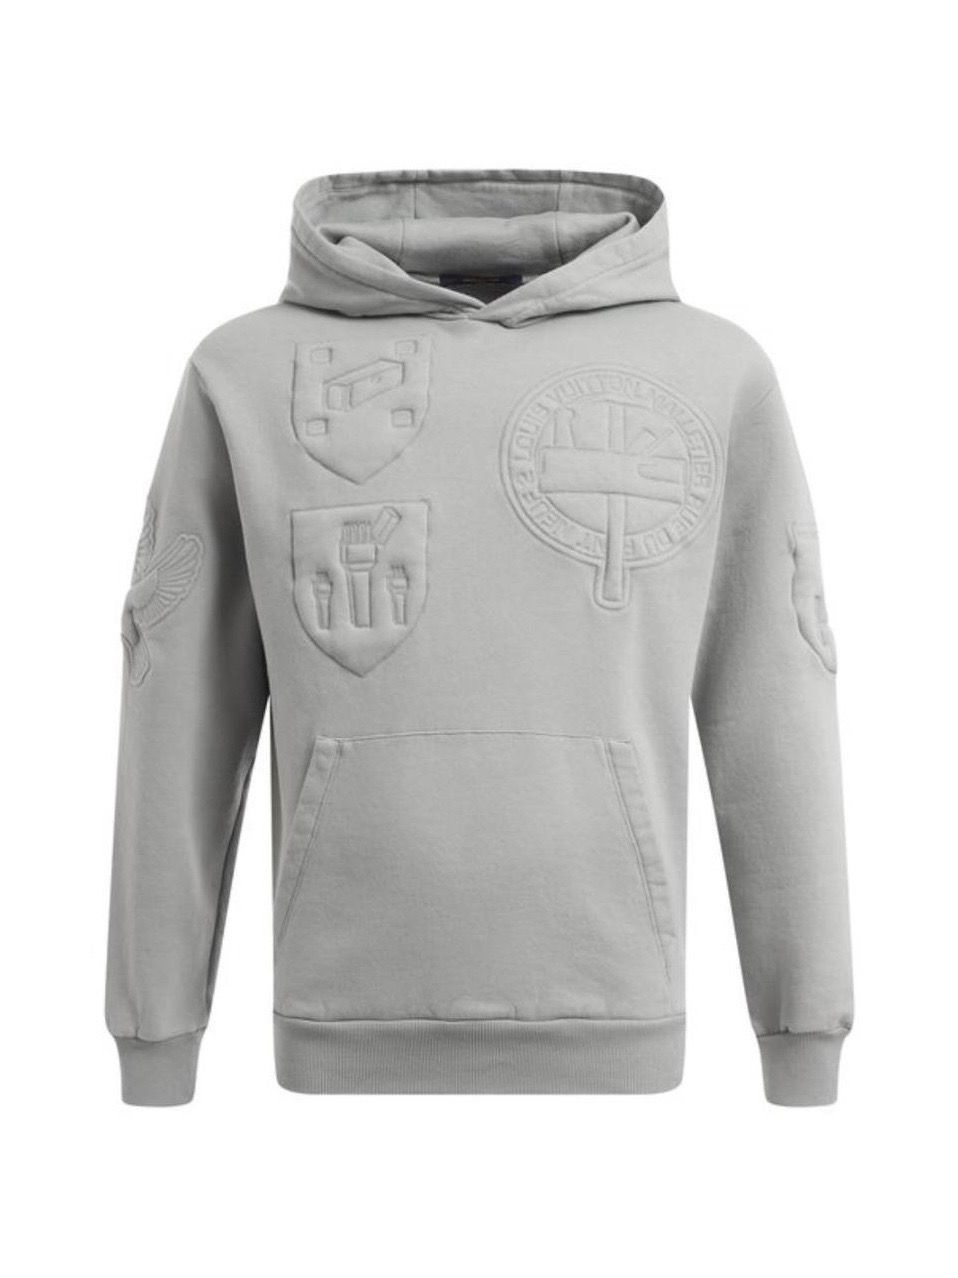 Louis Vuitton 3D LV Graffiti Embroidered Zipped Hoodie, Grey, L